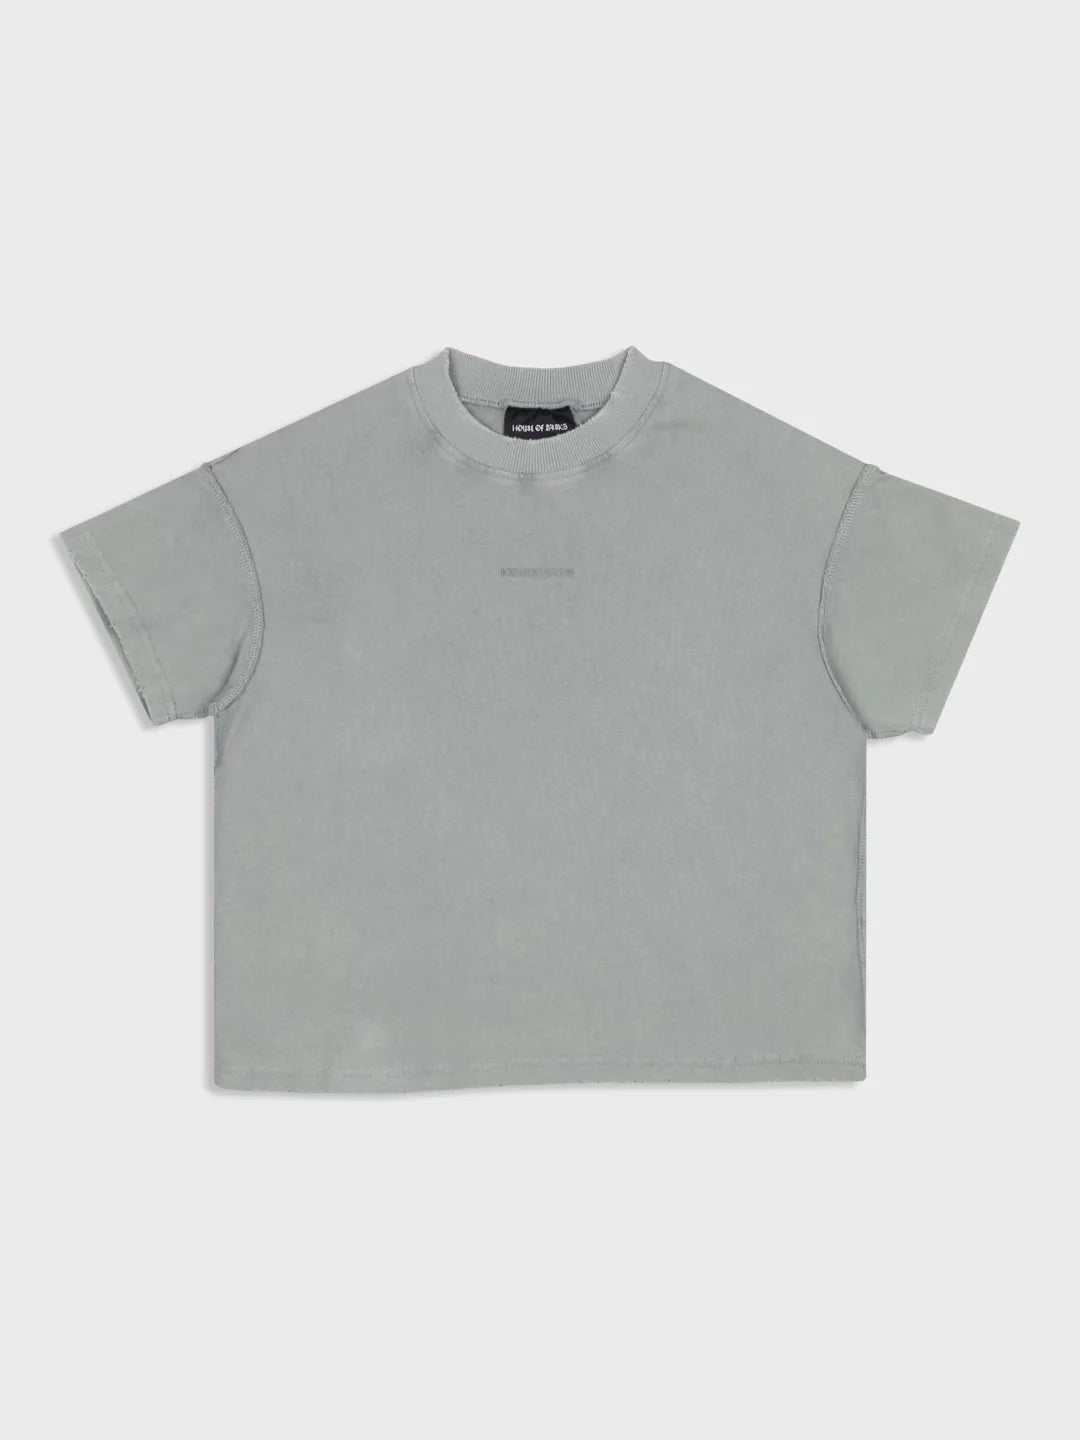 HOUSE OF BASICZ - THE INSIDE OUT OVERSIZED TEE